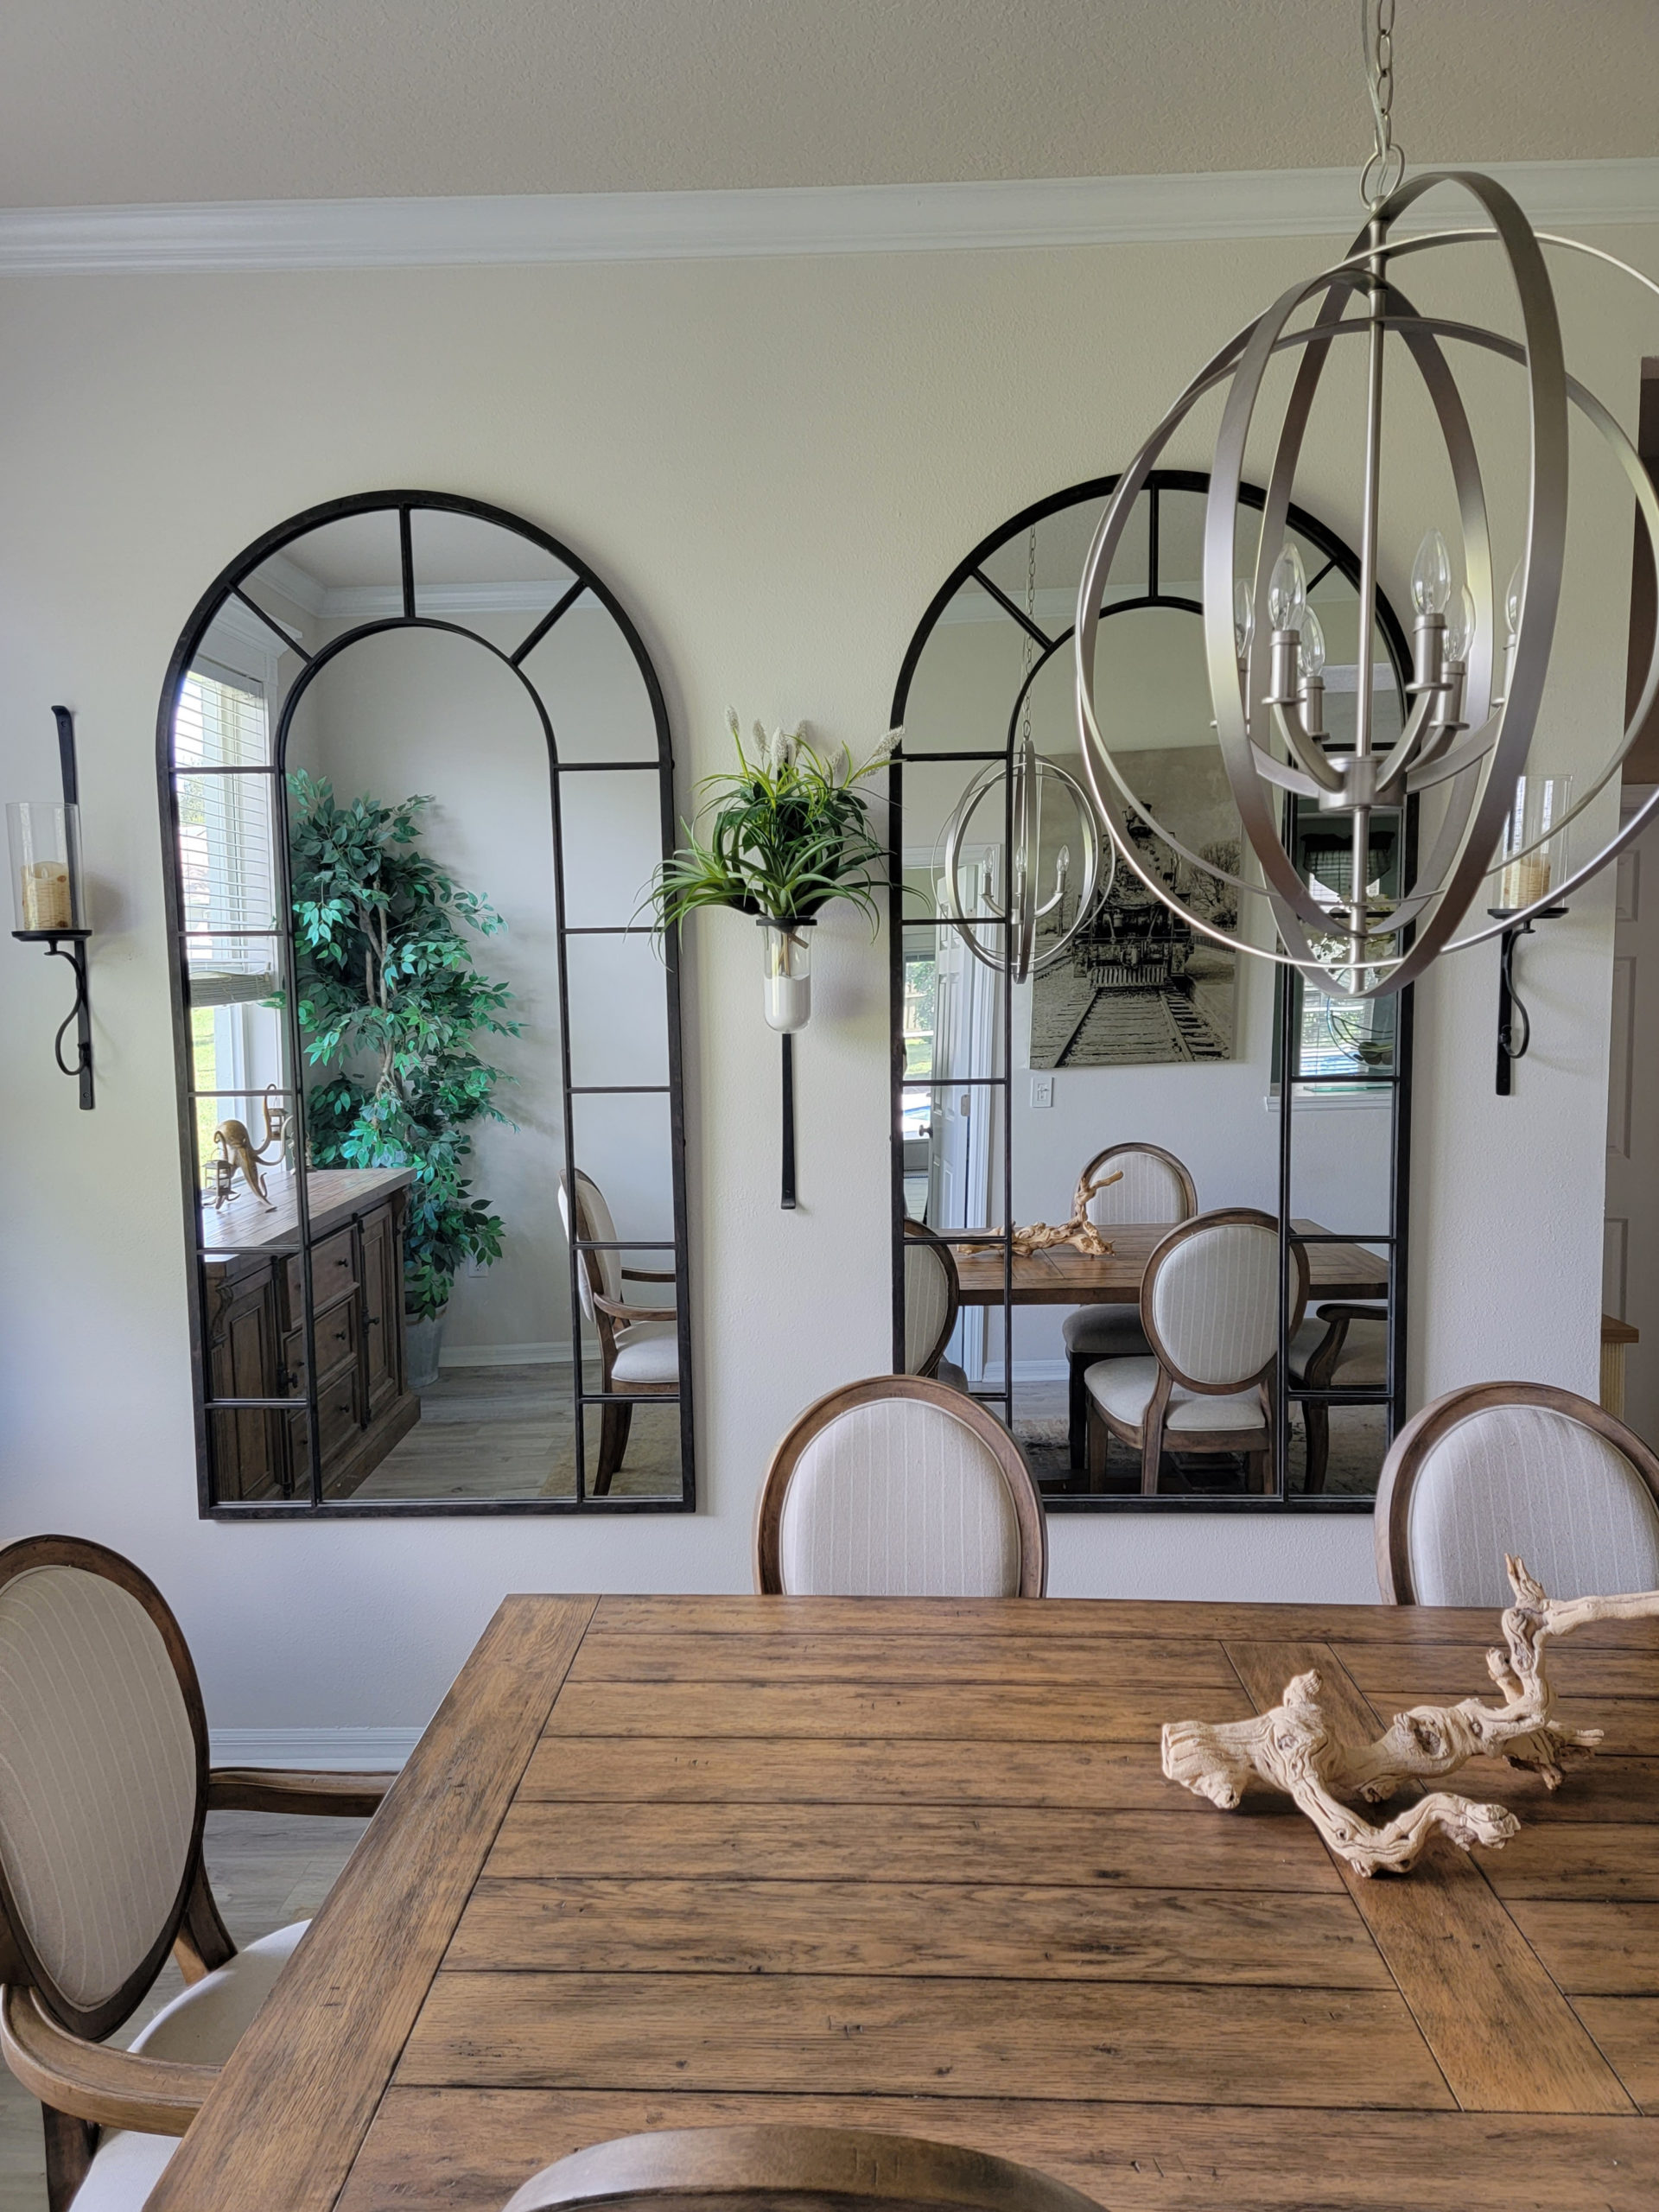 Warm off-white paint colour, similar to Benjamin Moore Ballet White. Shown in dining room, arched mirrors. Kylie M Interiors CLIENT PHOTO